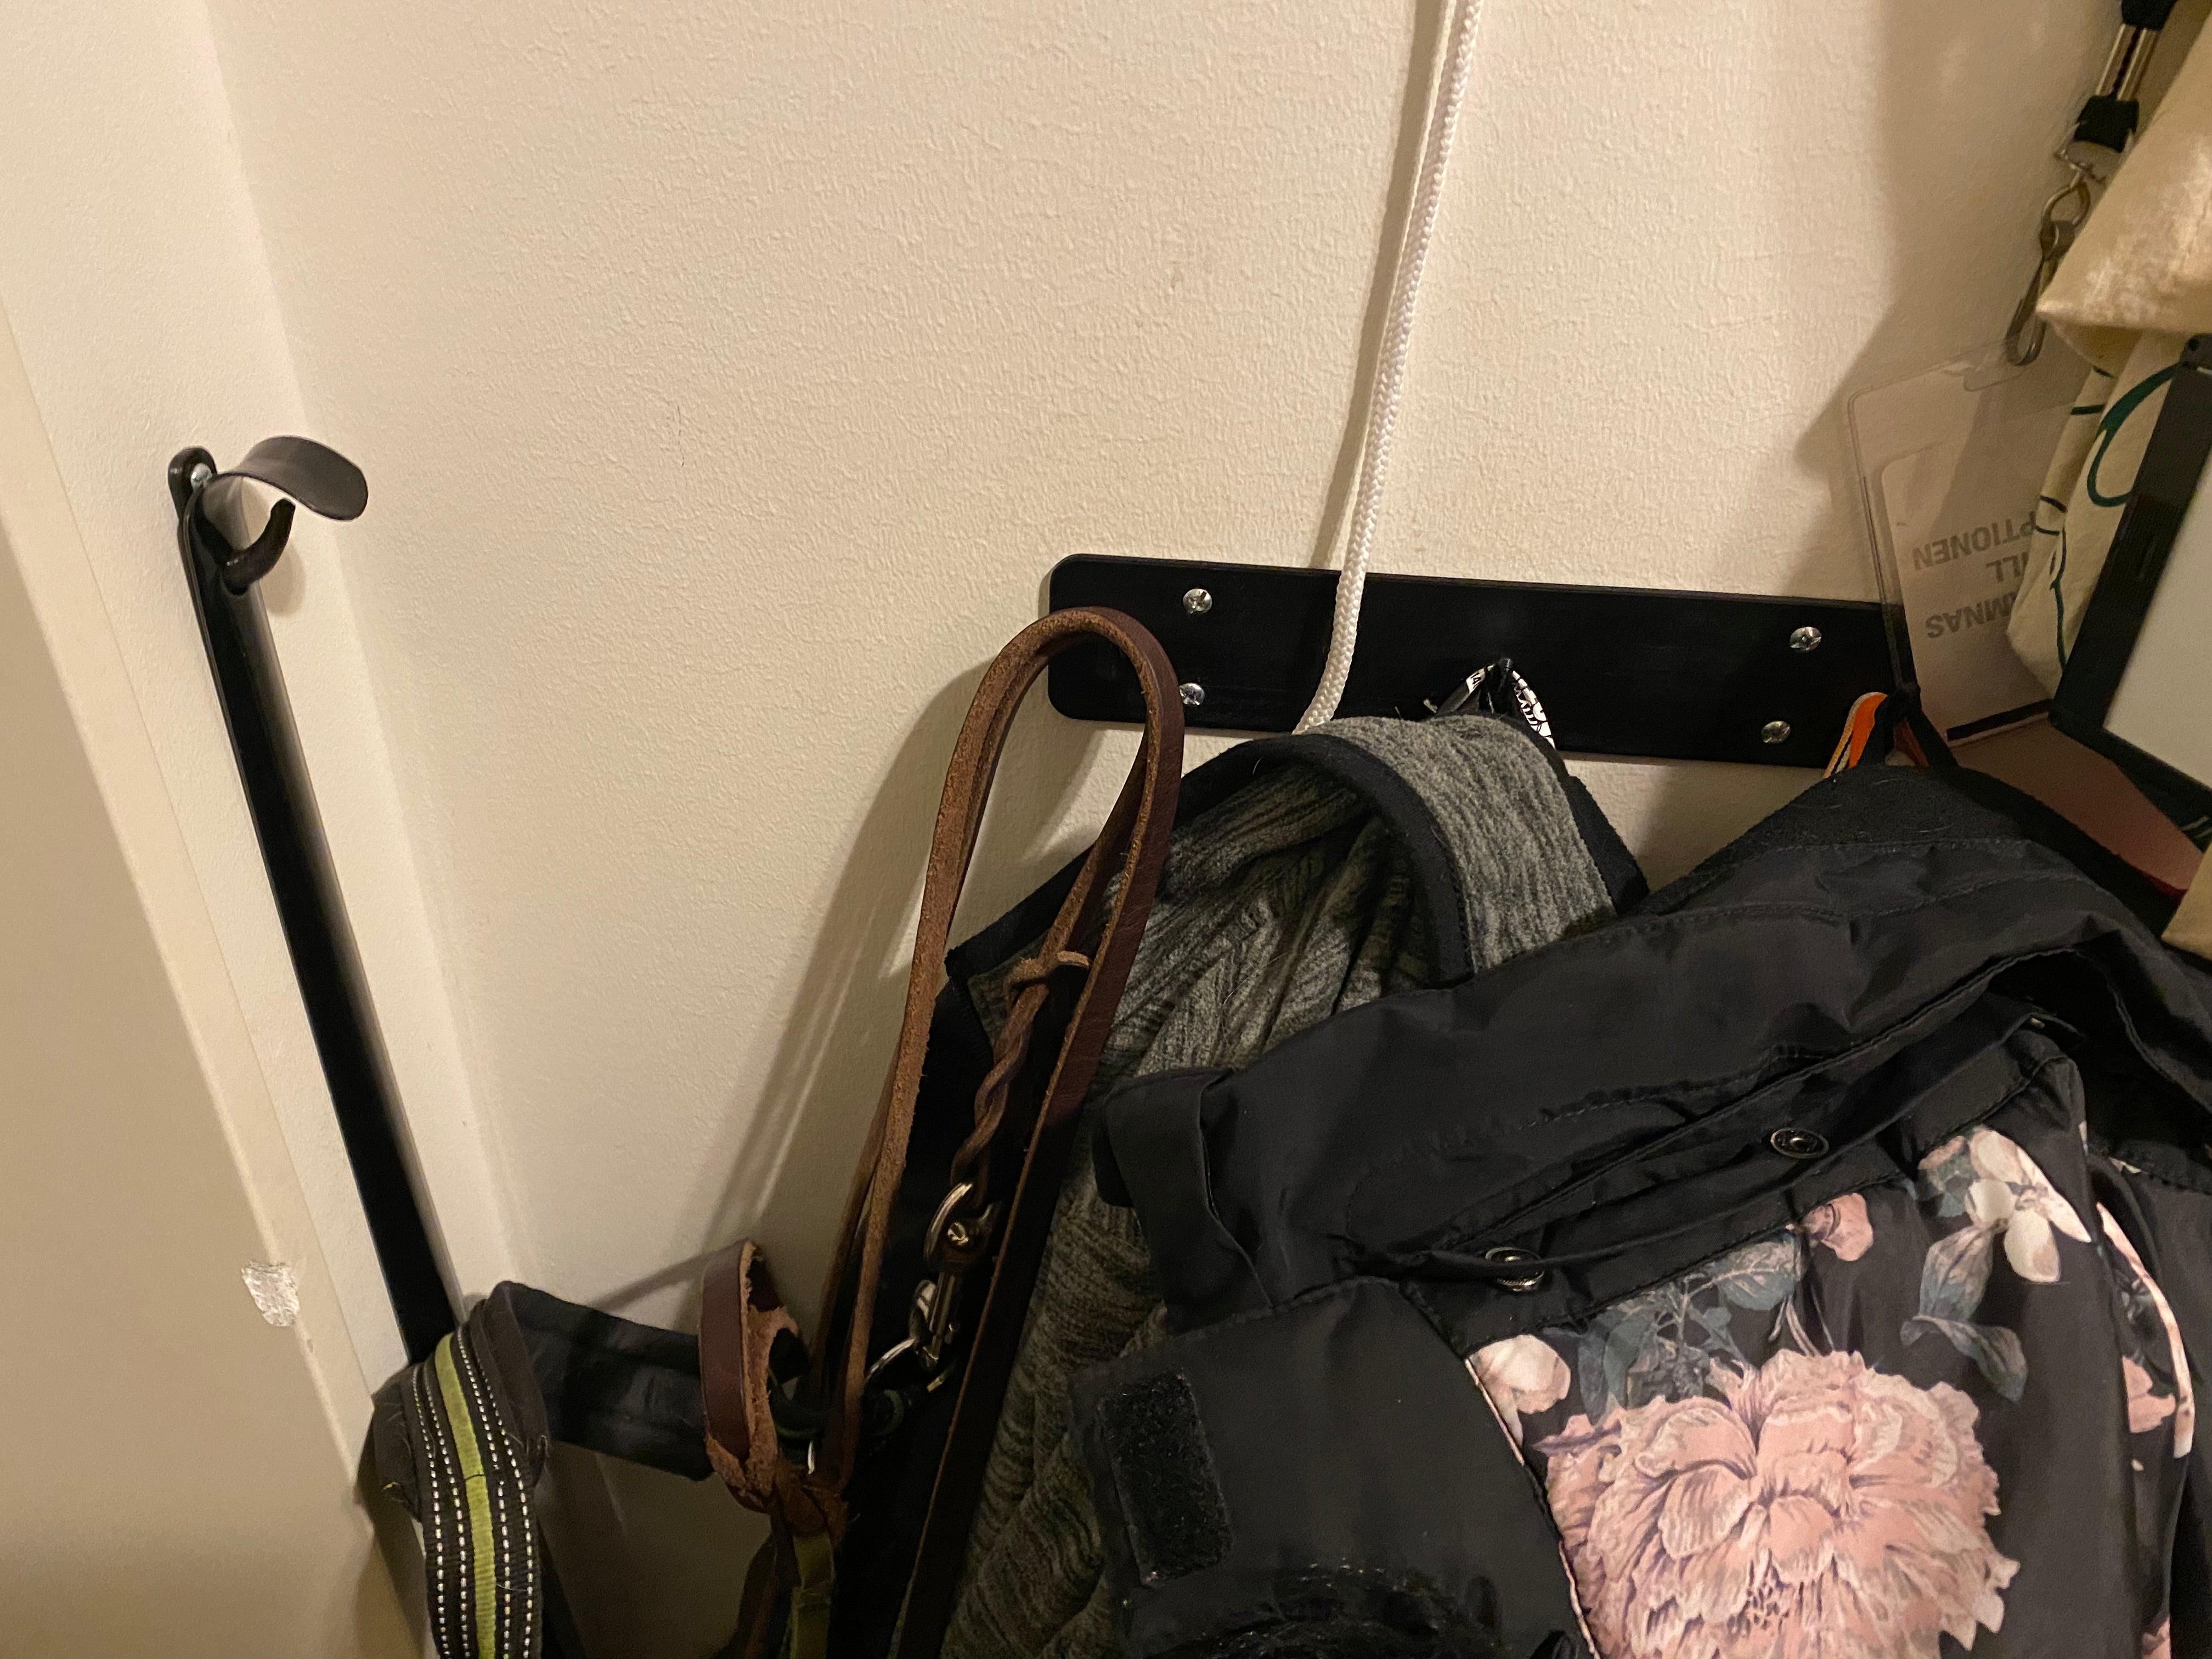 Wall-mounted hook for clothes and shoe horn